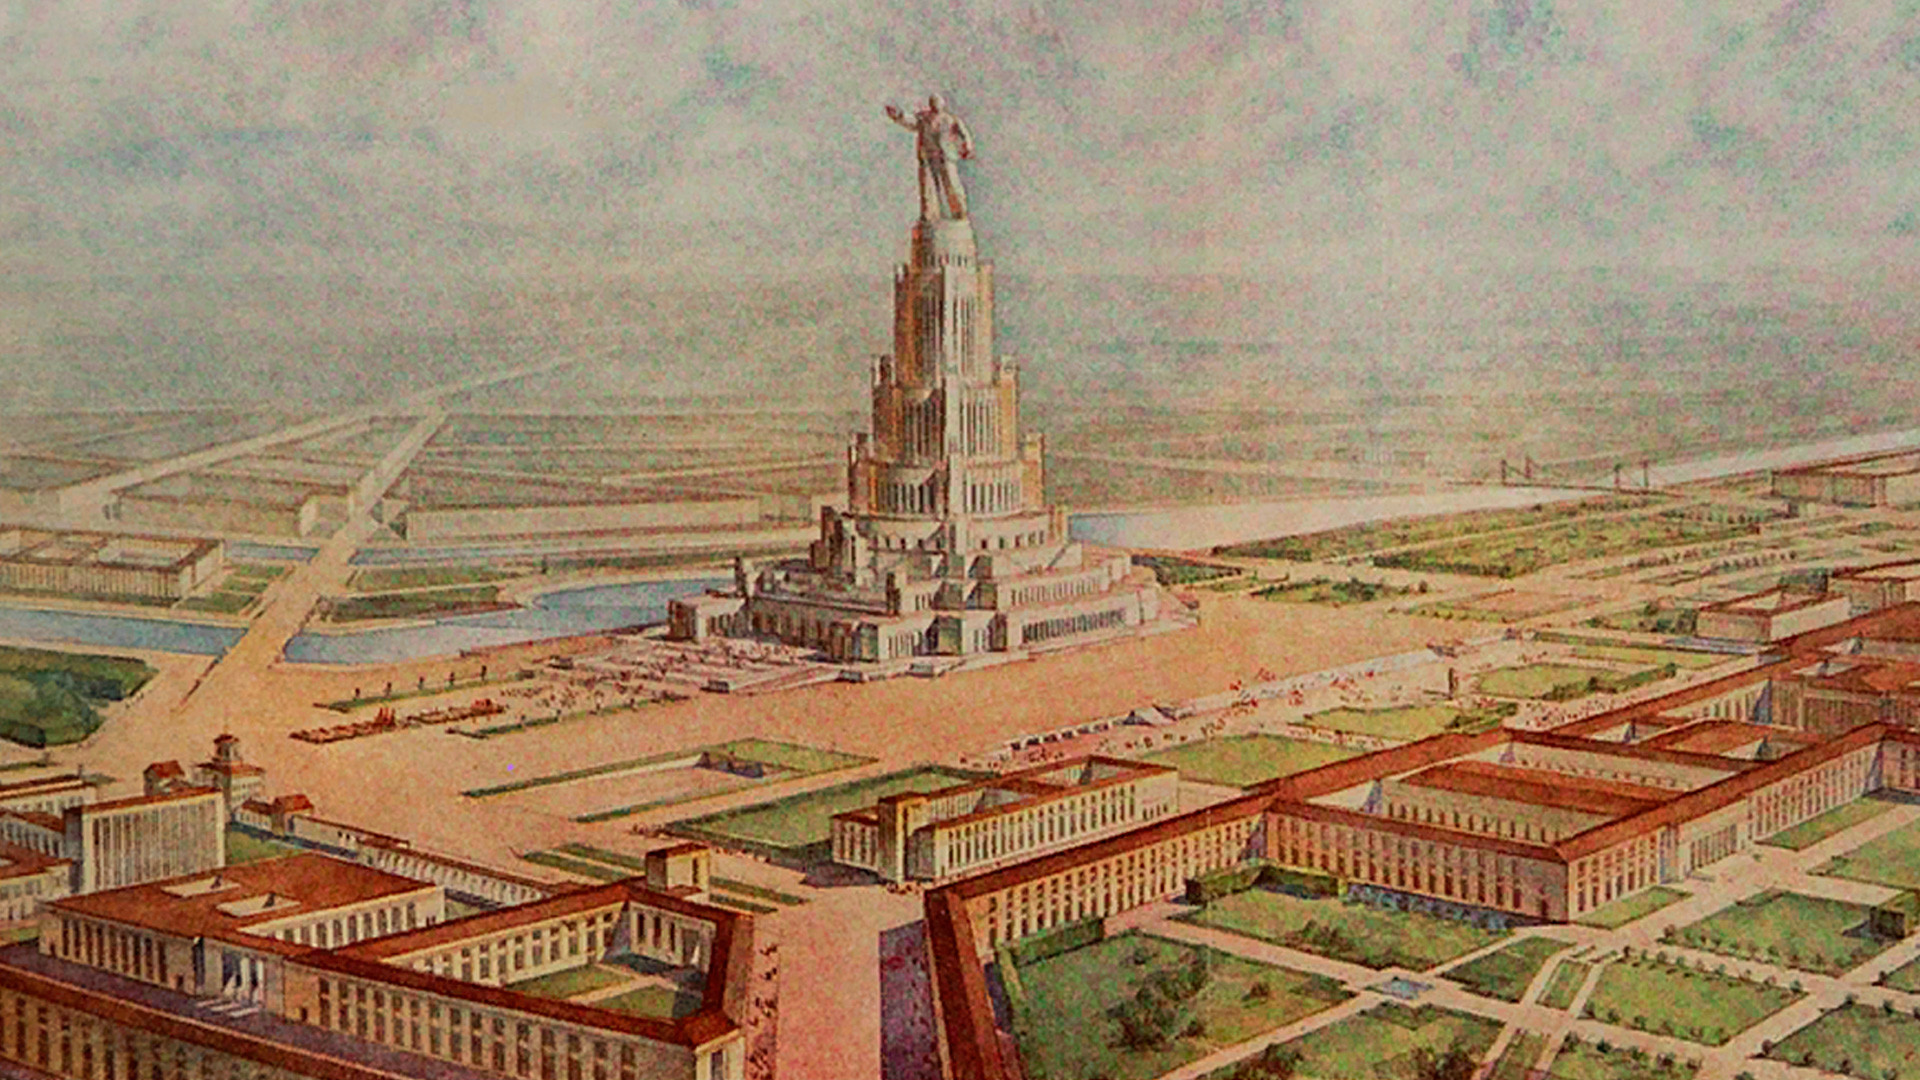 Illustration for the Palace of the Soviets